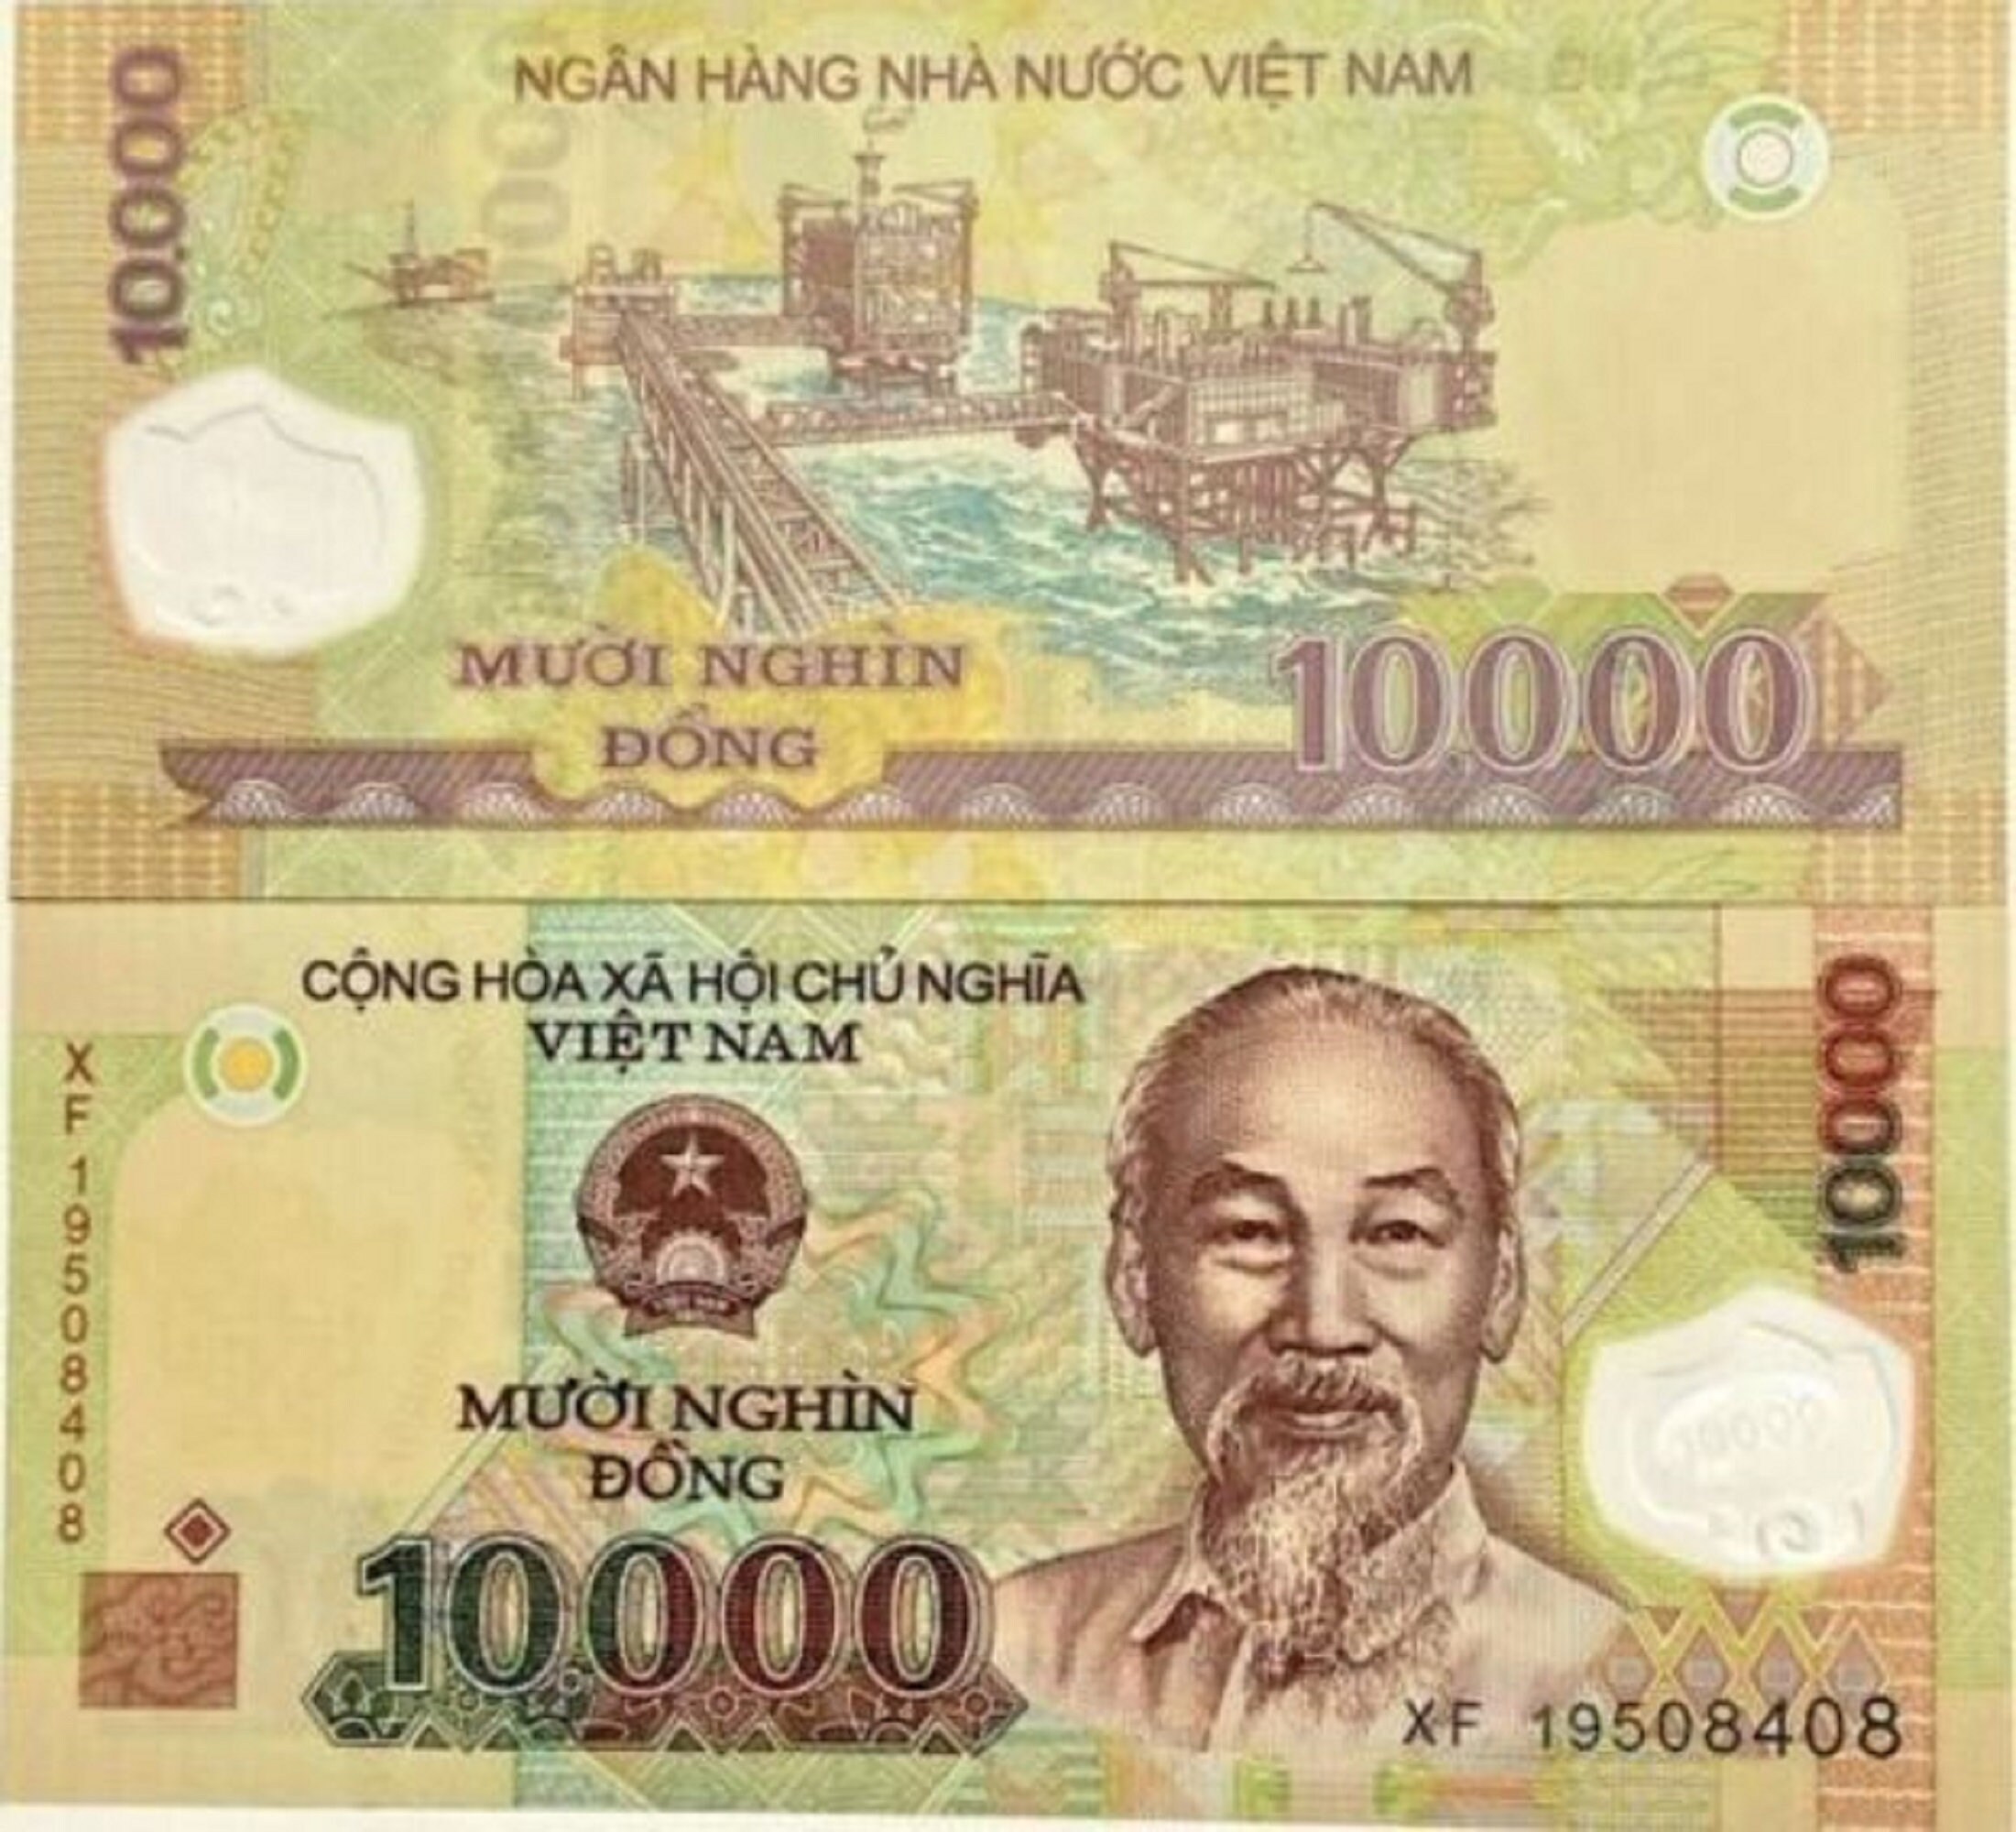 Details about   15,000 Vietnamese Dong Currency 1 x 10,000 + 1 x 5,000 UNC Vietnam Banknotes 